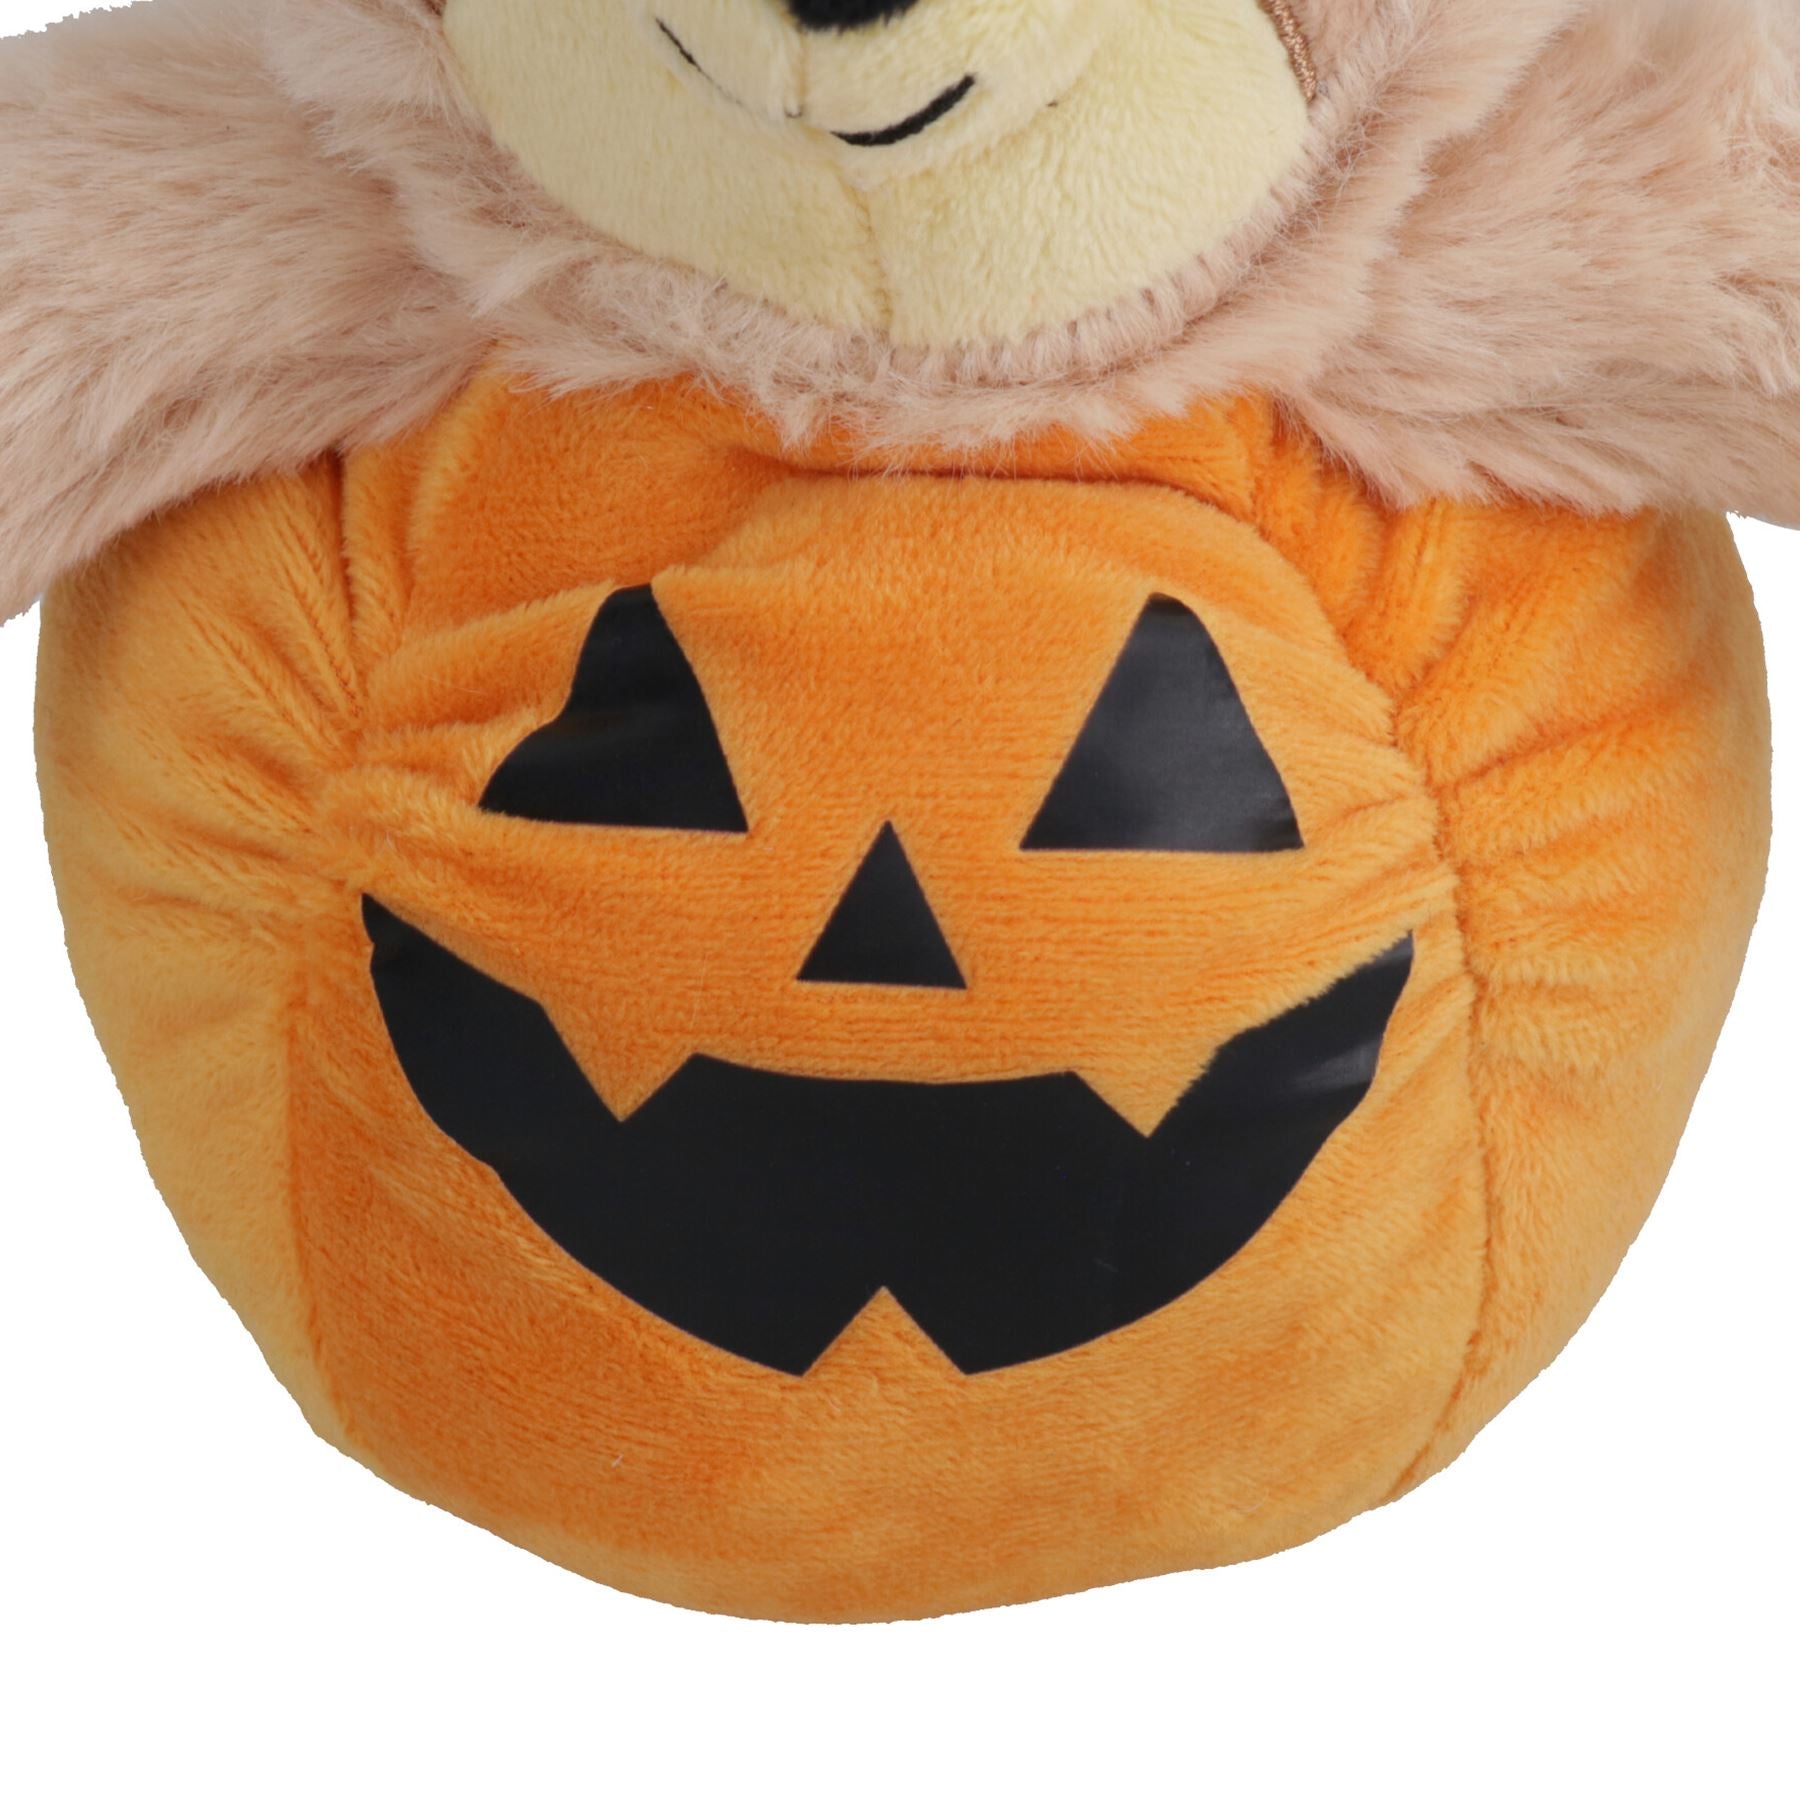 Dog Puppy Small Halloween Gift Plush Comfort Squeaky Sloth Pumpkin Toy